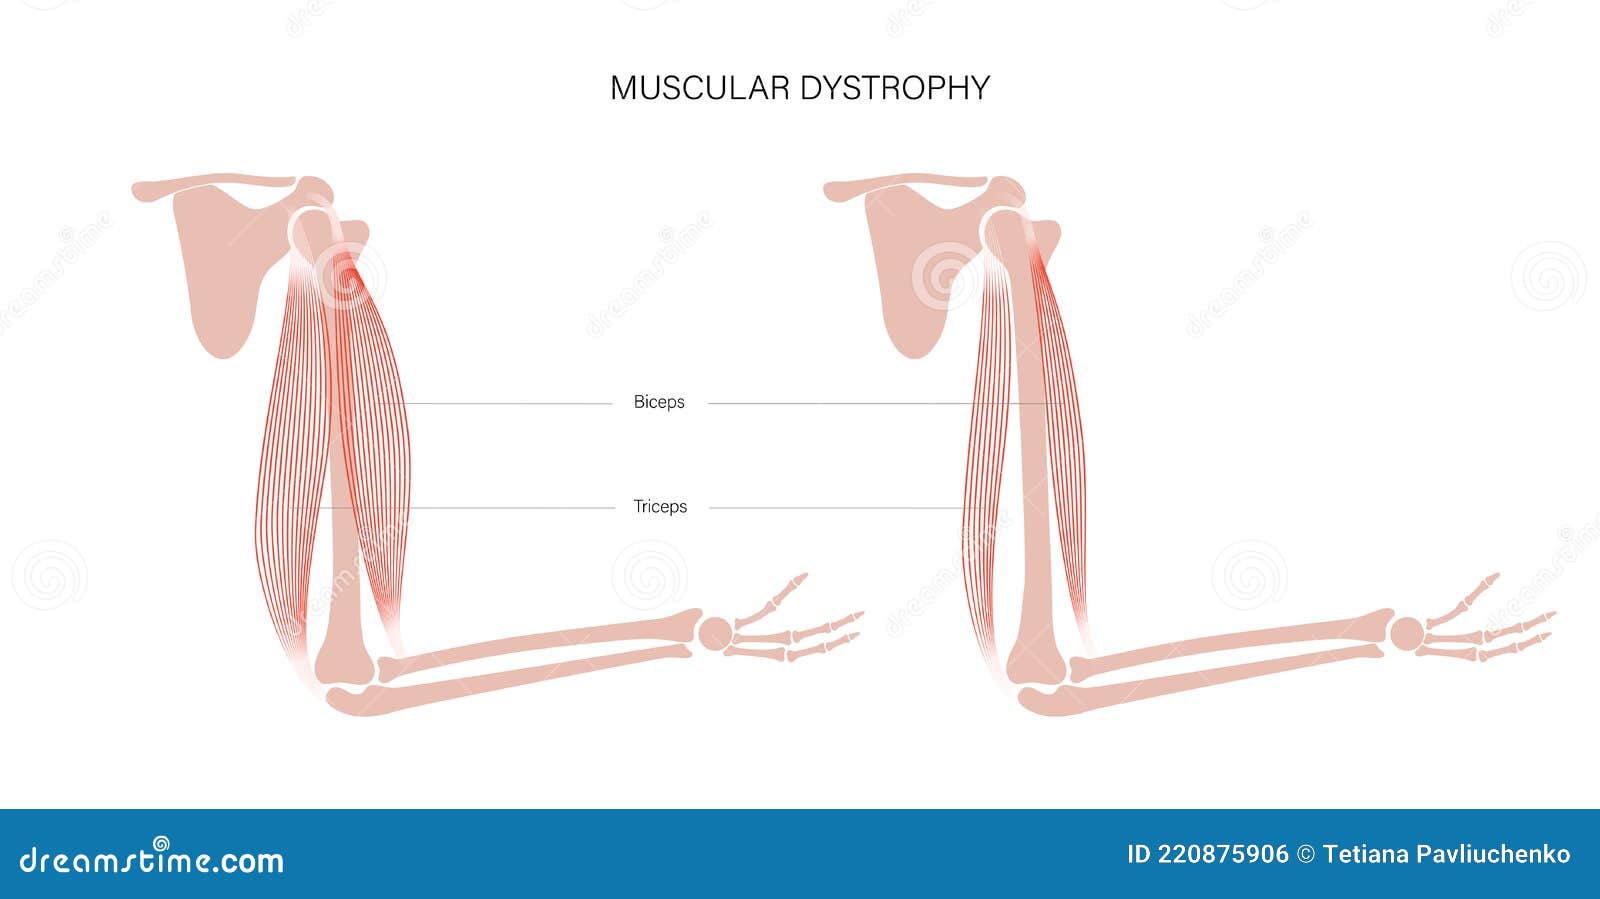 muscular dystrophy of arm